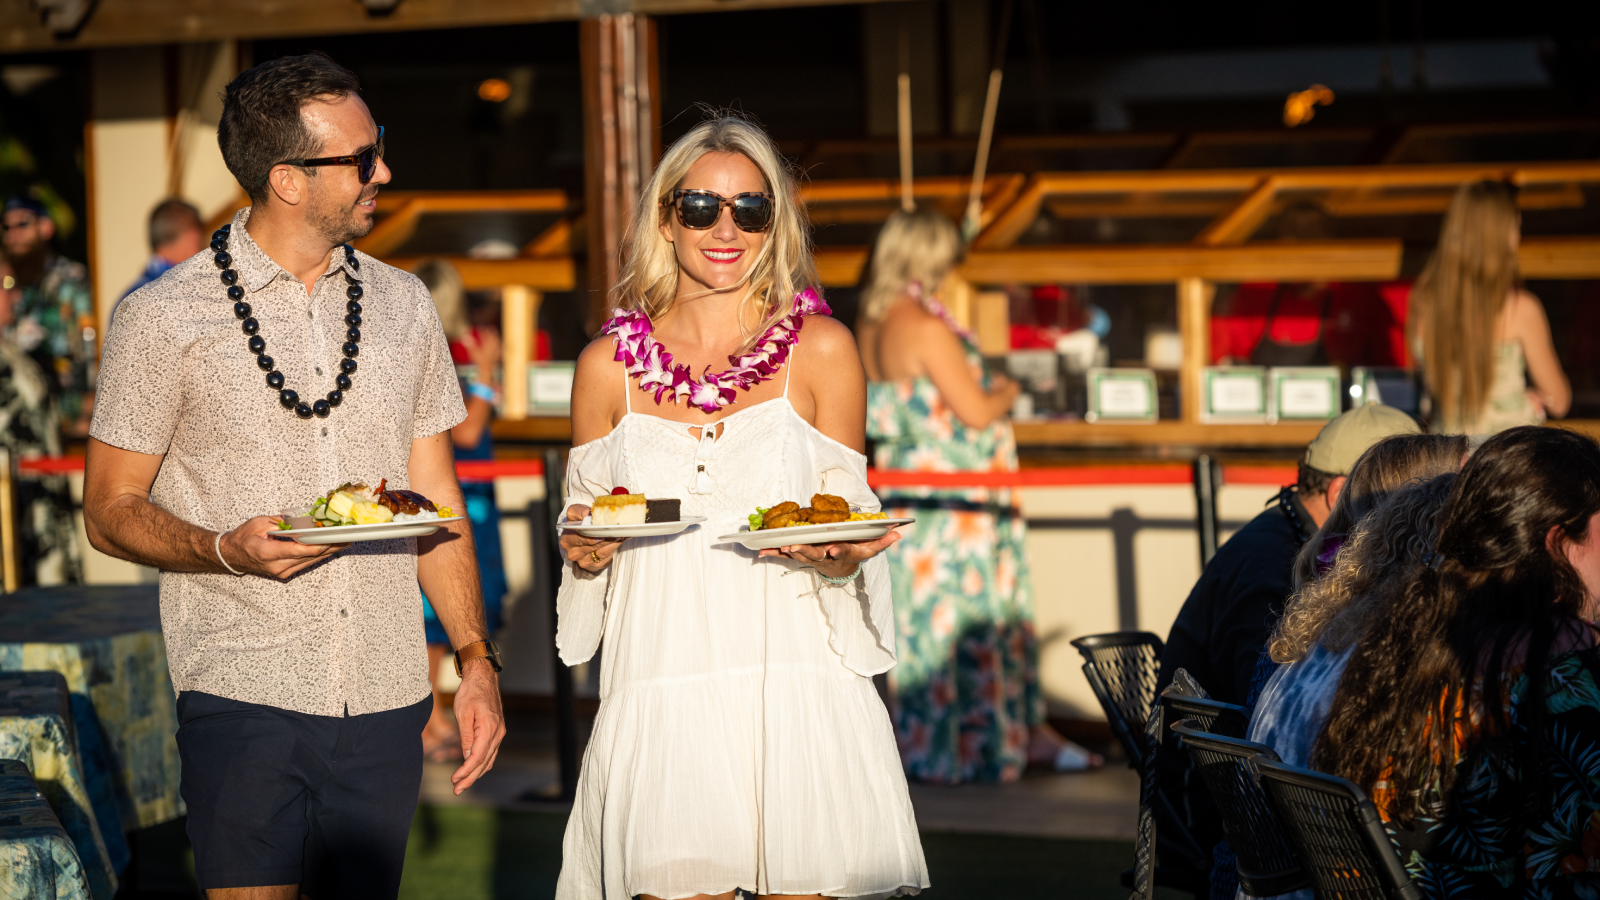 Woman holding two plates of food at a luau